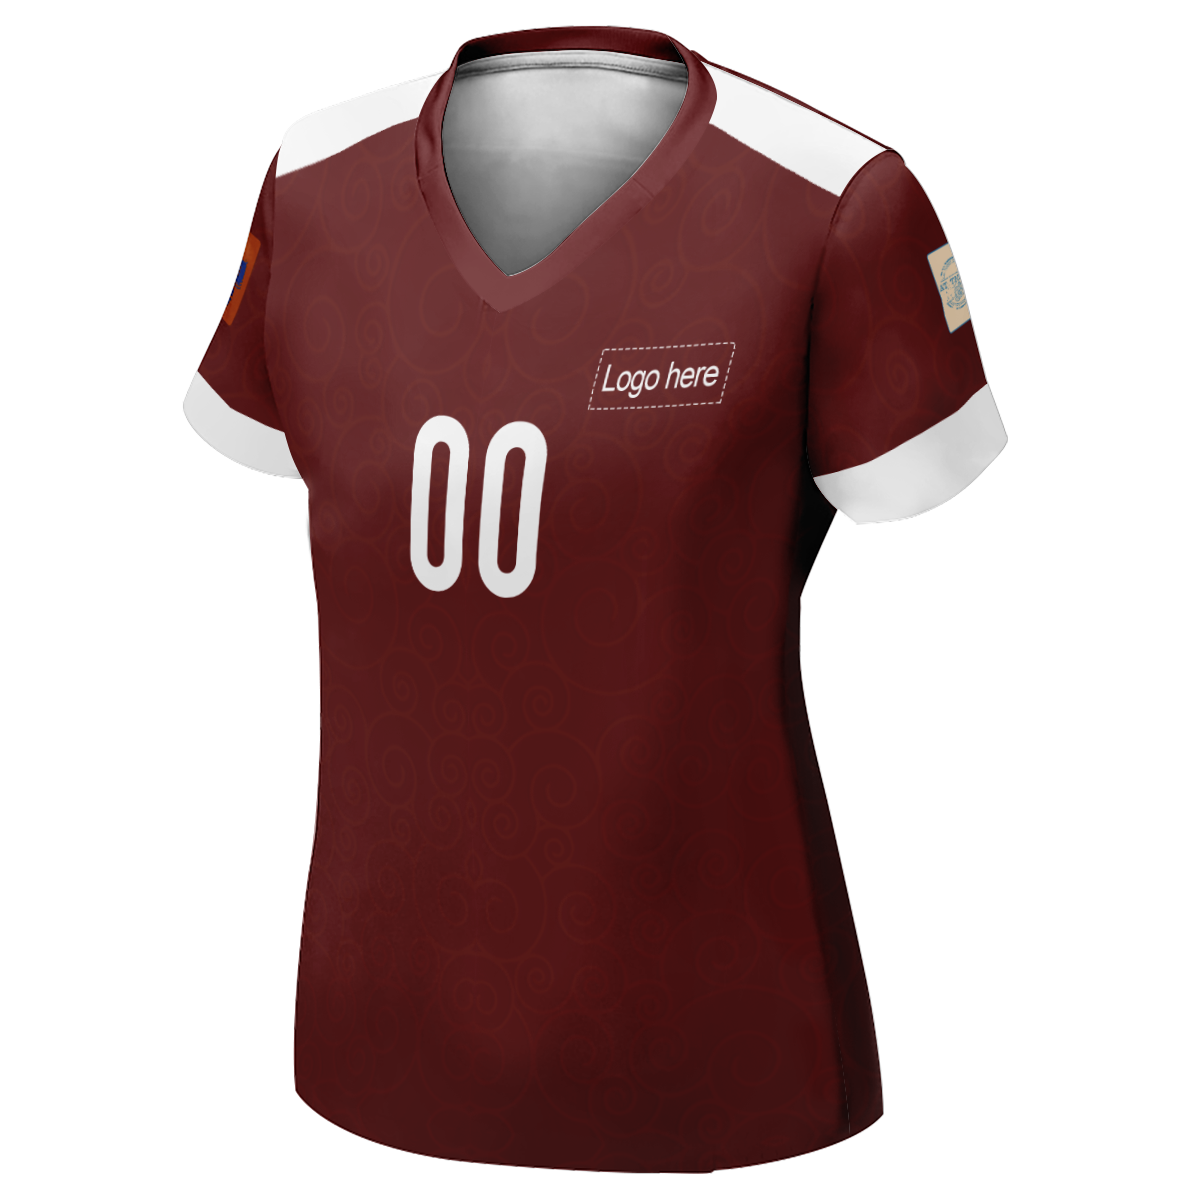 Women's Flannel Qatar World Cup Custom Soccer Jersey With Picture